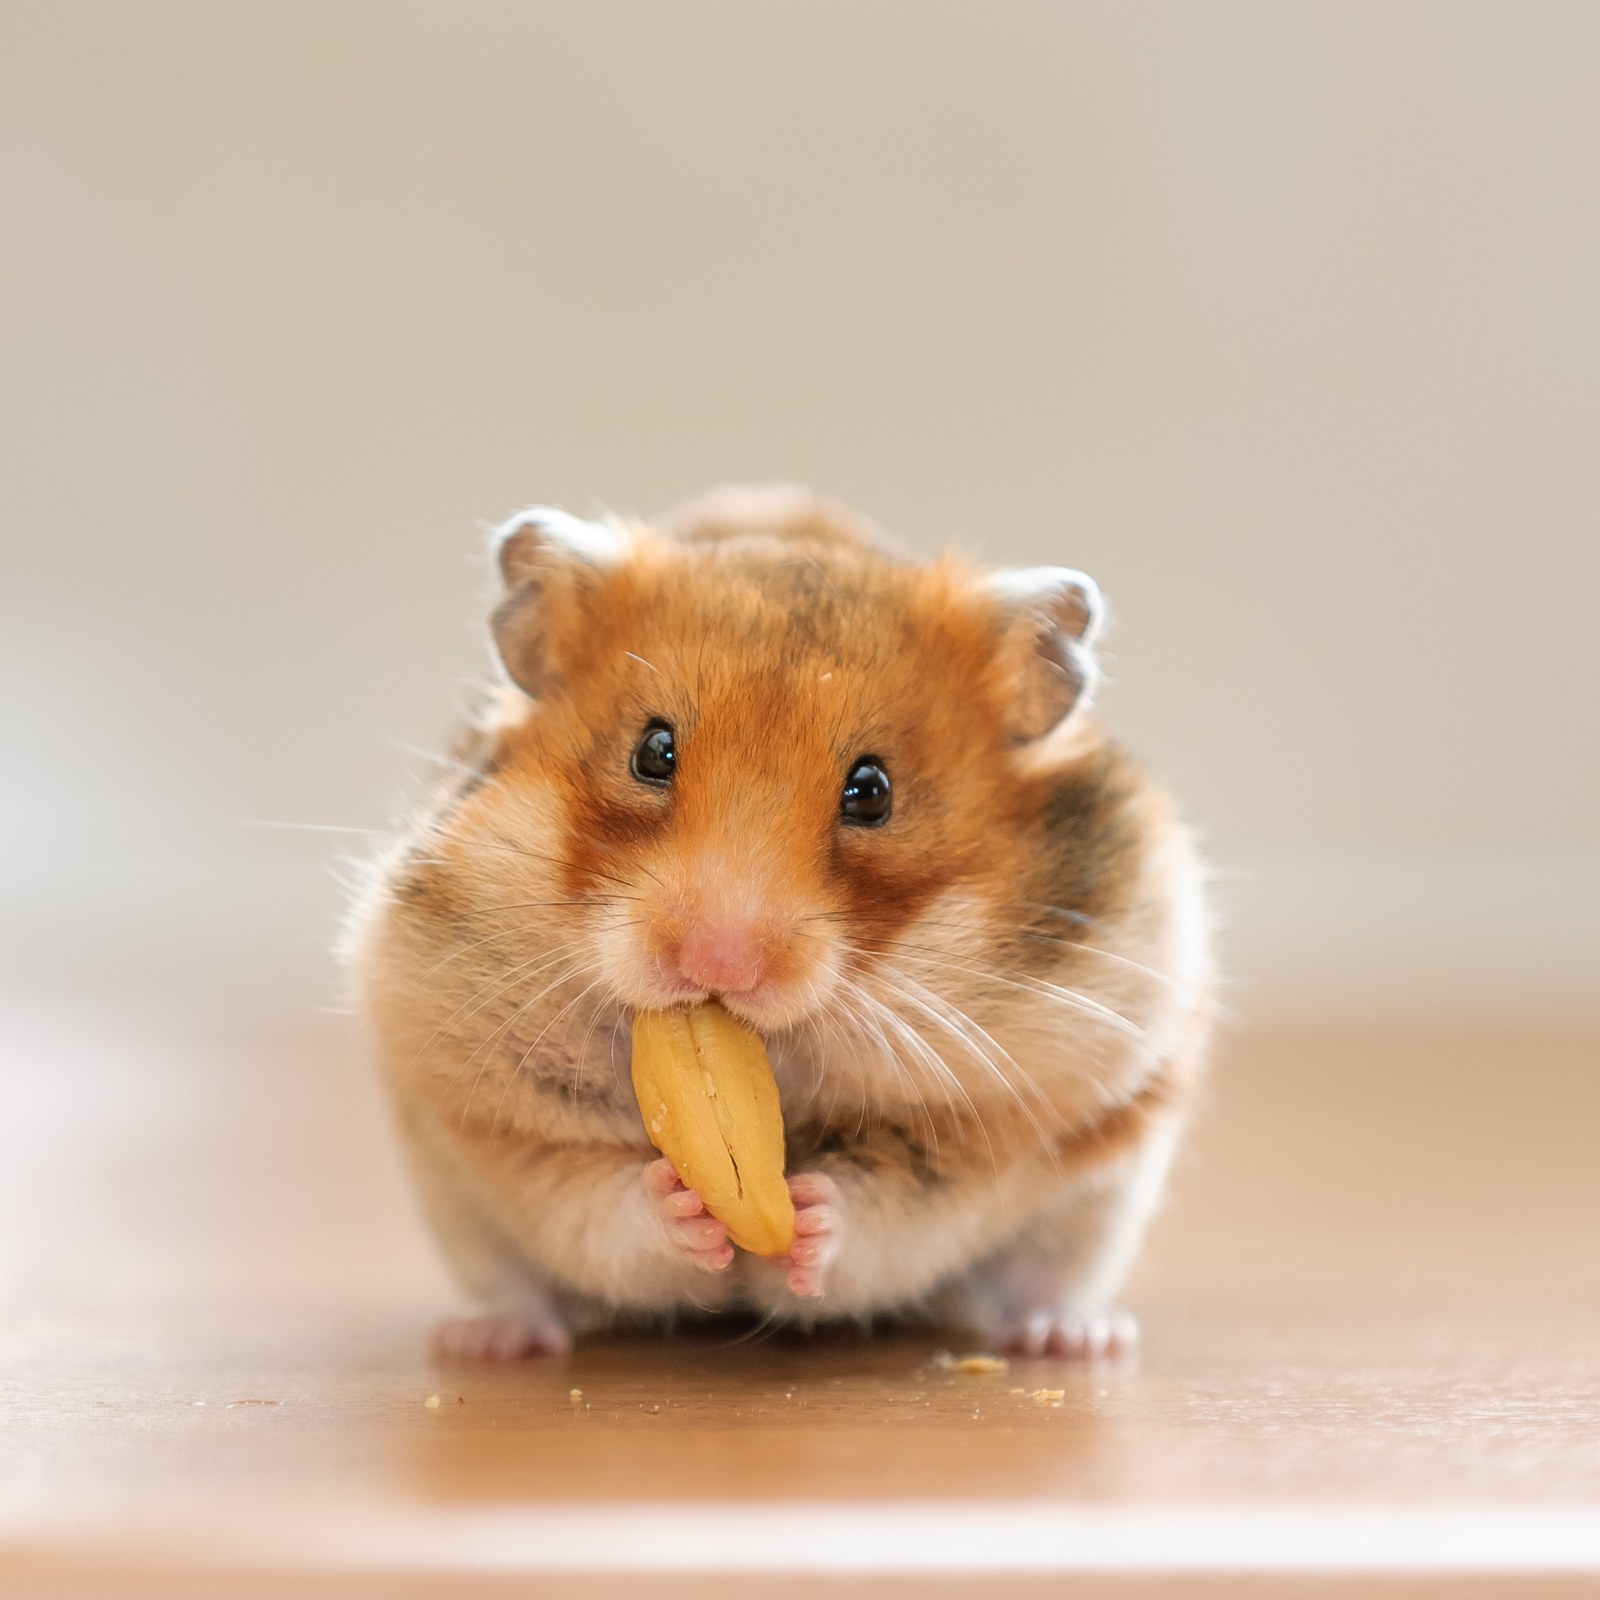 Why Do Hamsters Eat Their Own Babies? 10 Weird Facts You Didn't About The Rodent